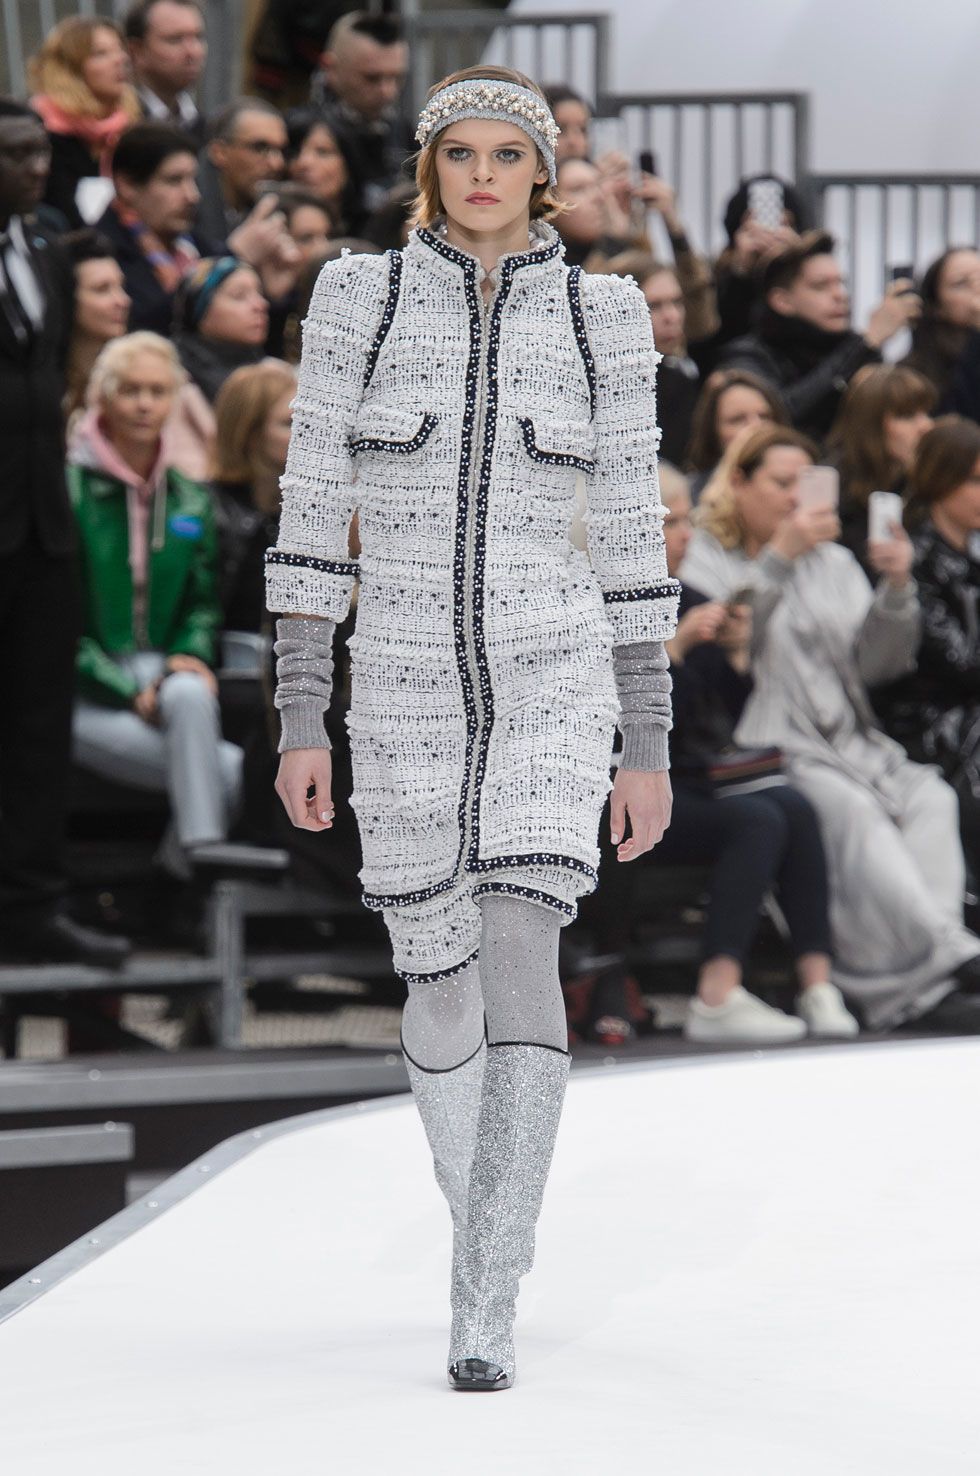 96 Looks From Chanel Fall 2017 PFW Show - Chanel Runway at Paris